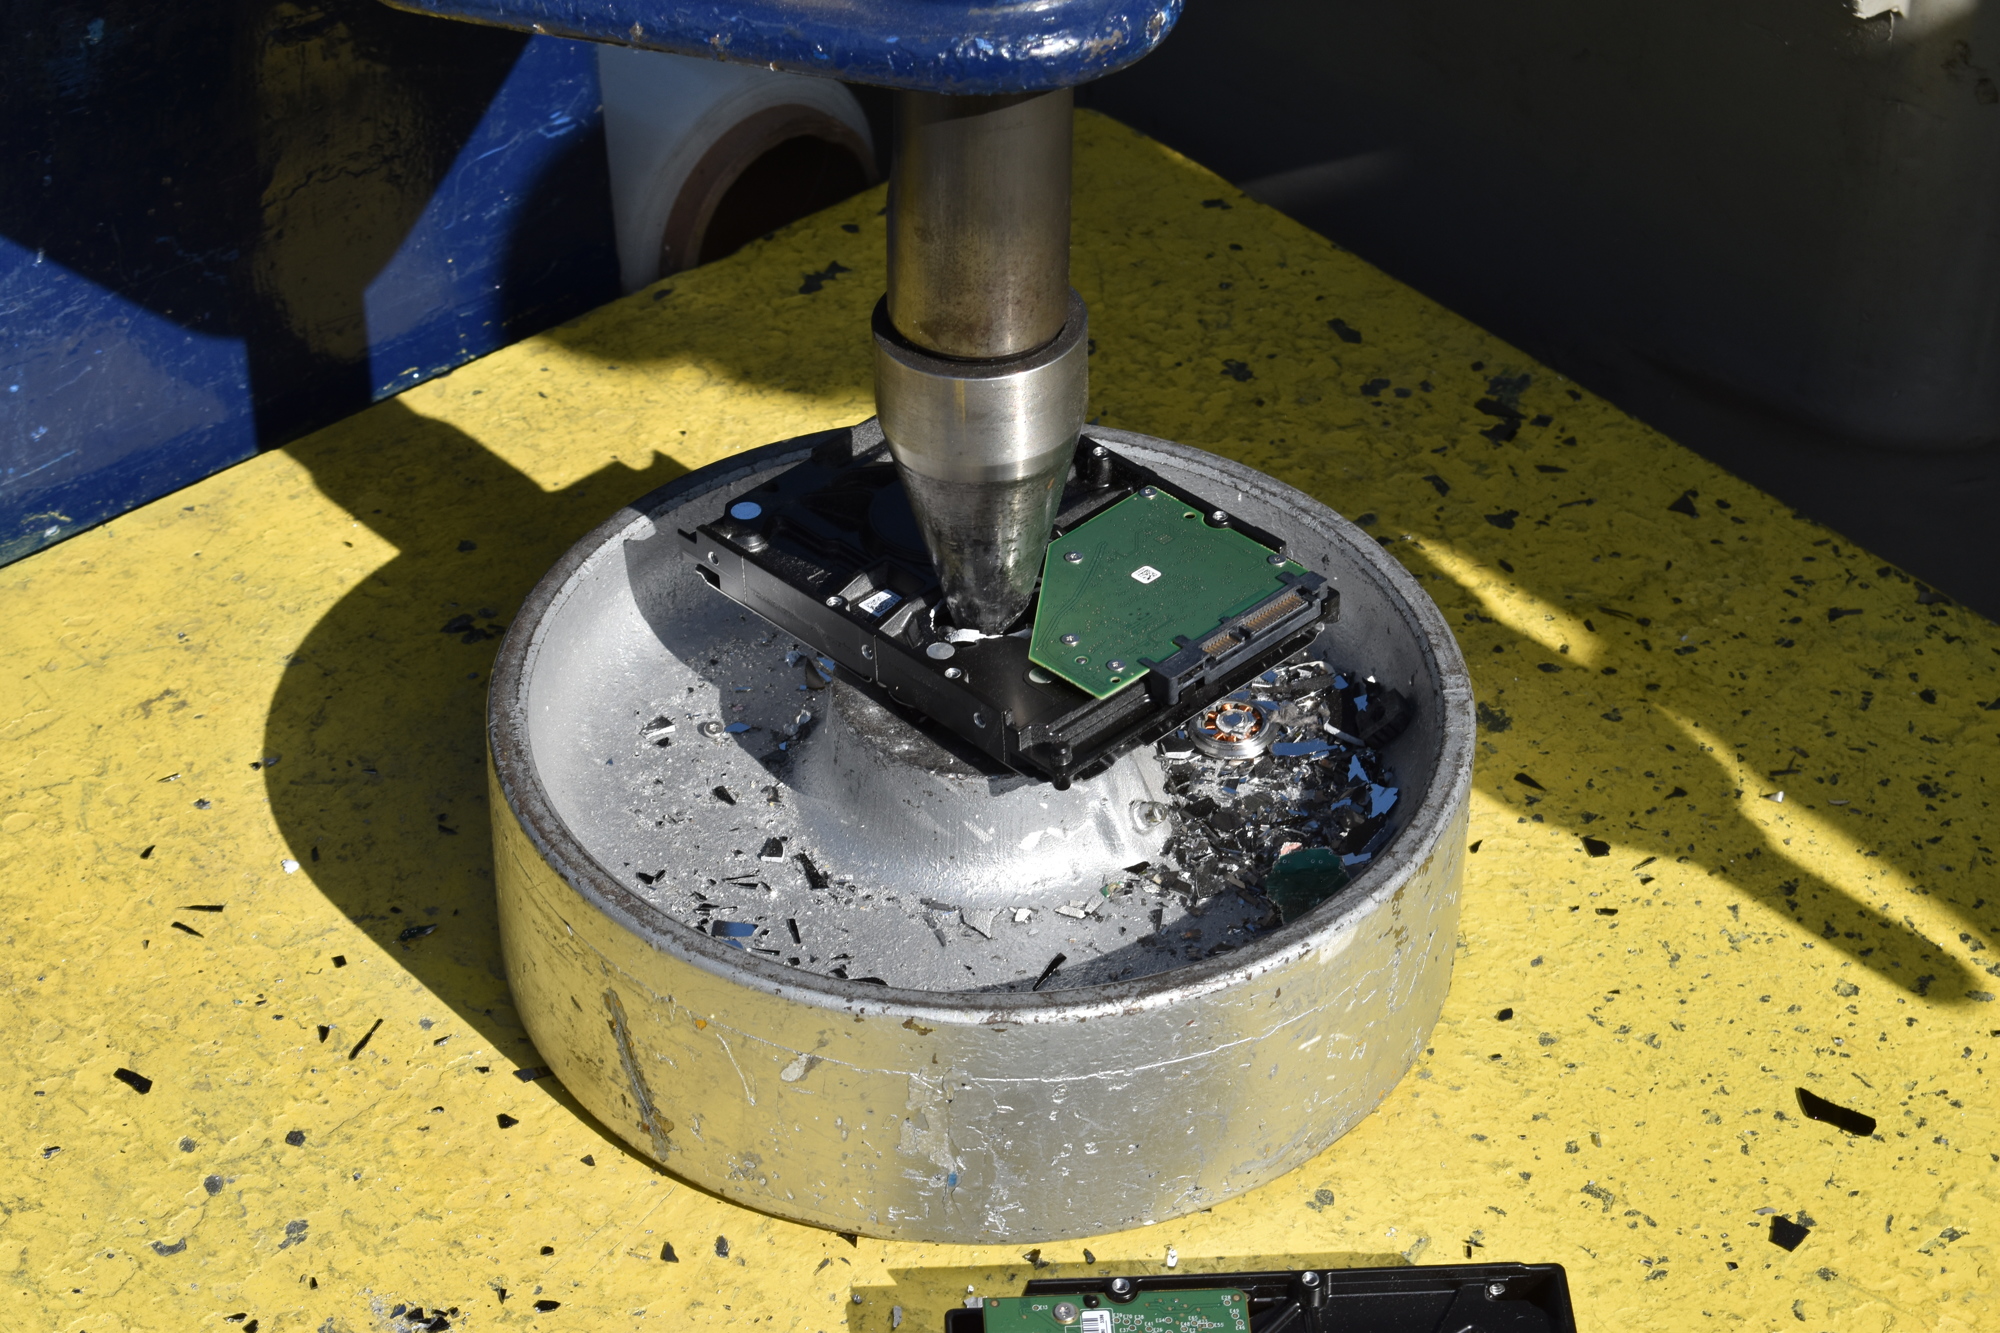 The drill press punctures a hard drive while fragments of hard drive platters litter the surrounding surface.